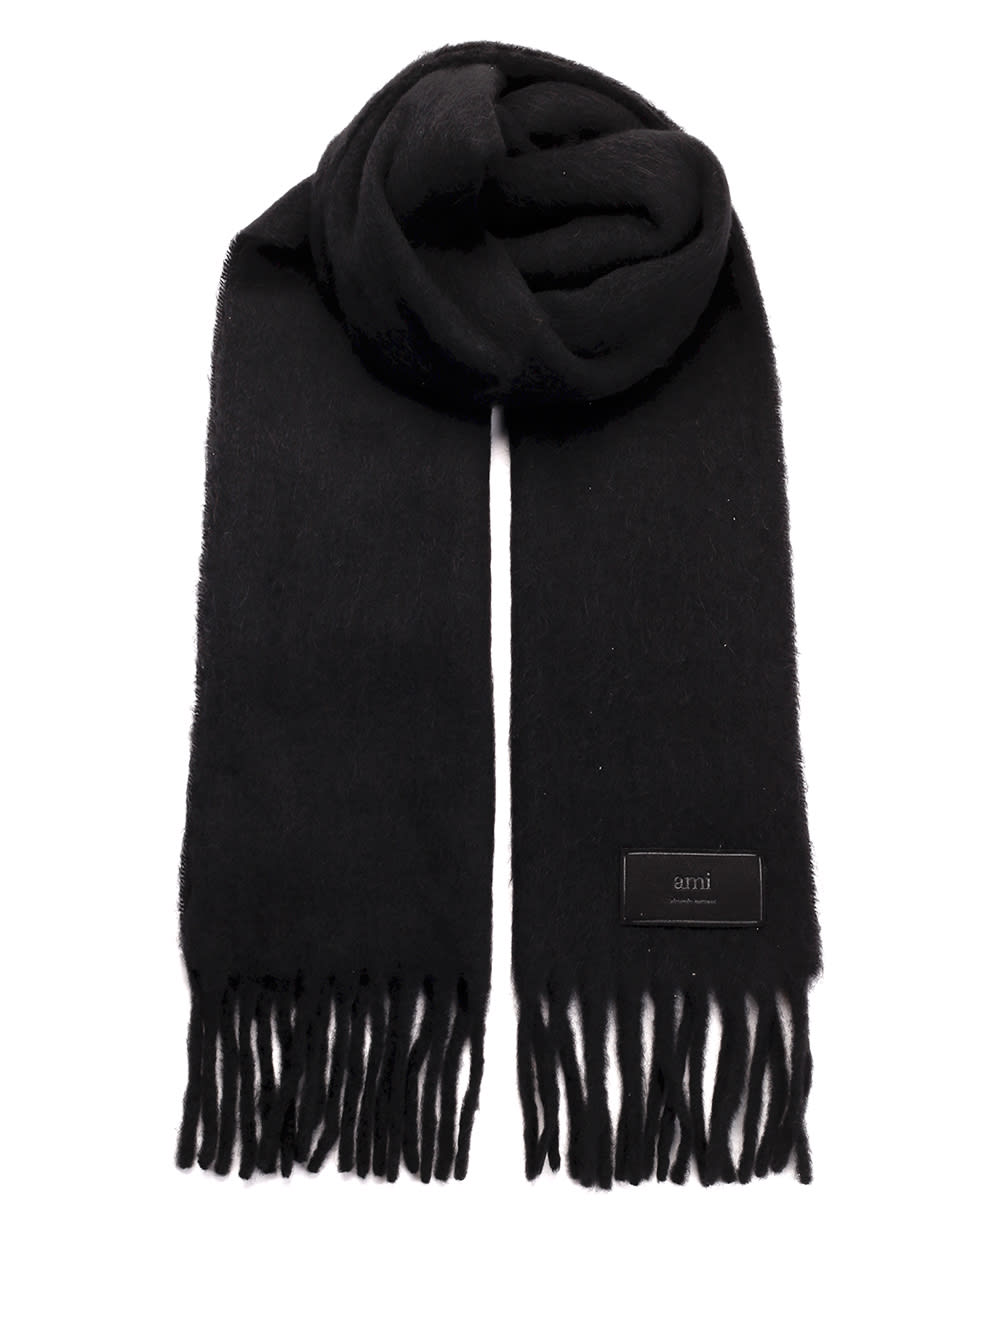 Black Scarf With Fringes